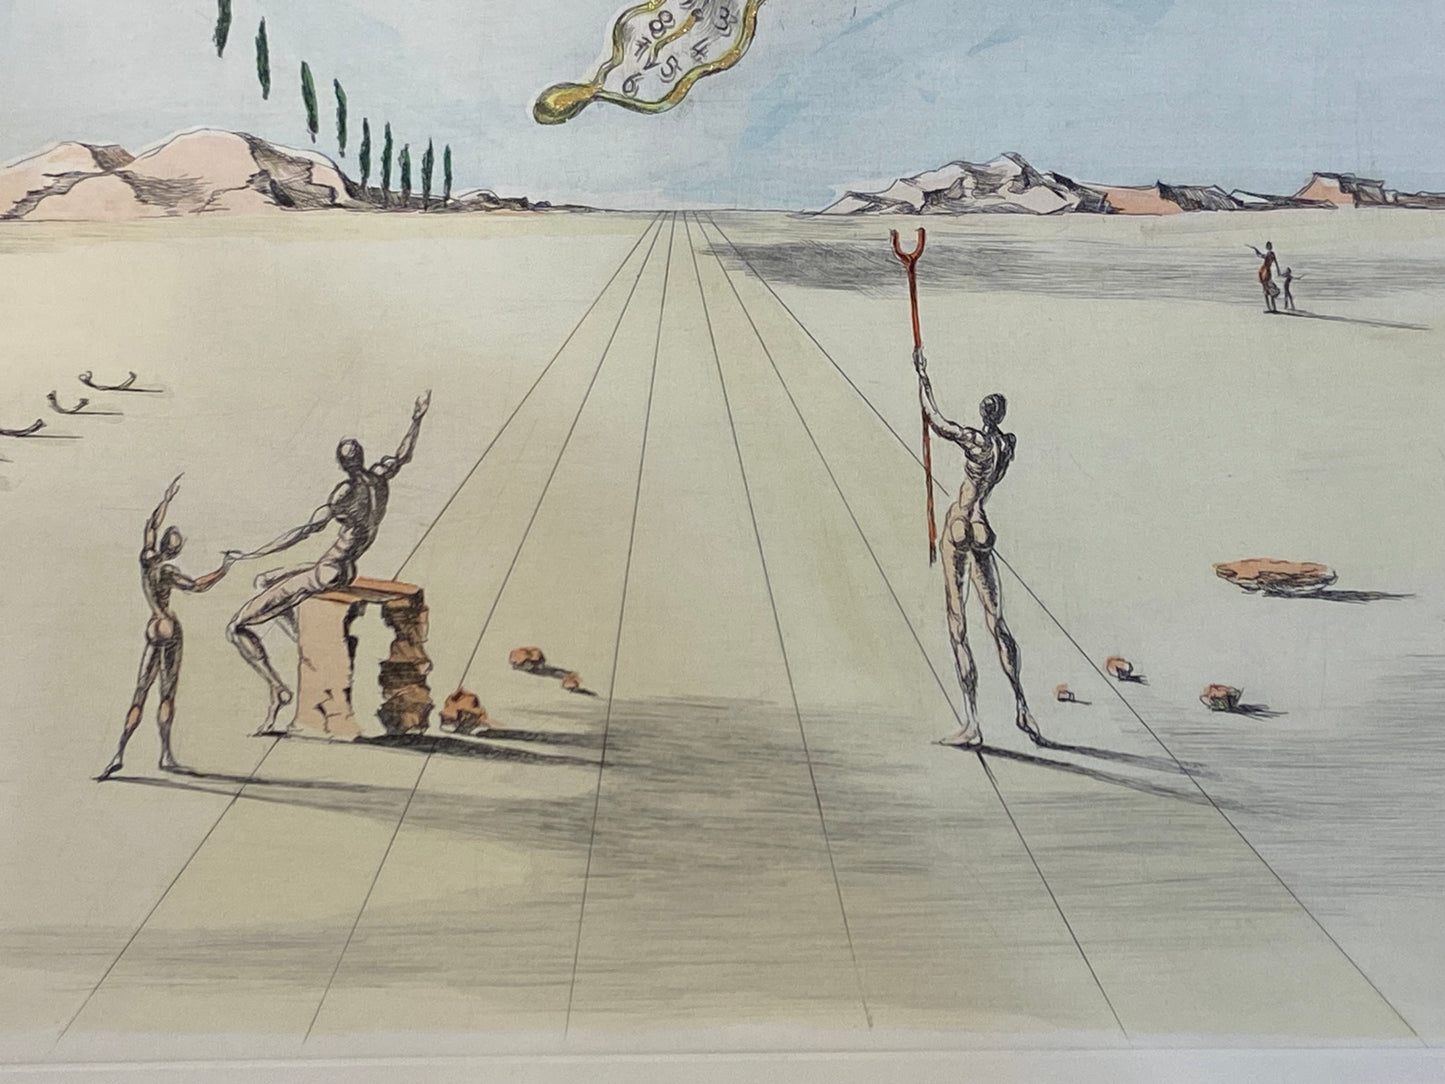 After Salvador Dalí "Moments of Lost Time" Lithograph 159/300 (27812)